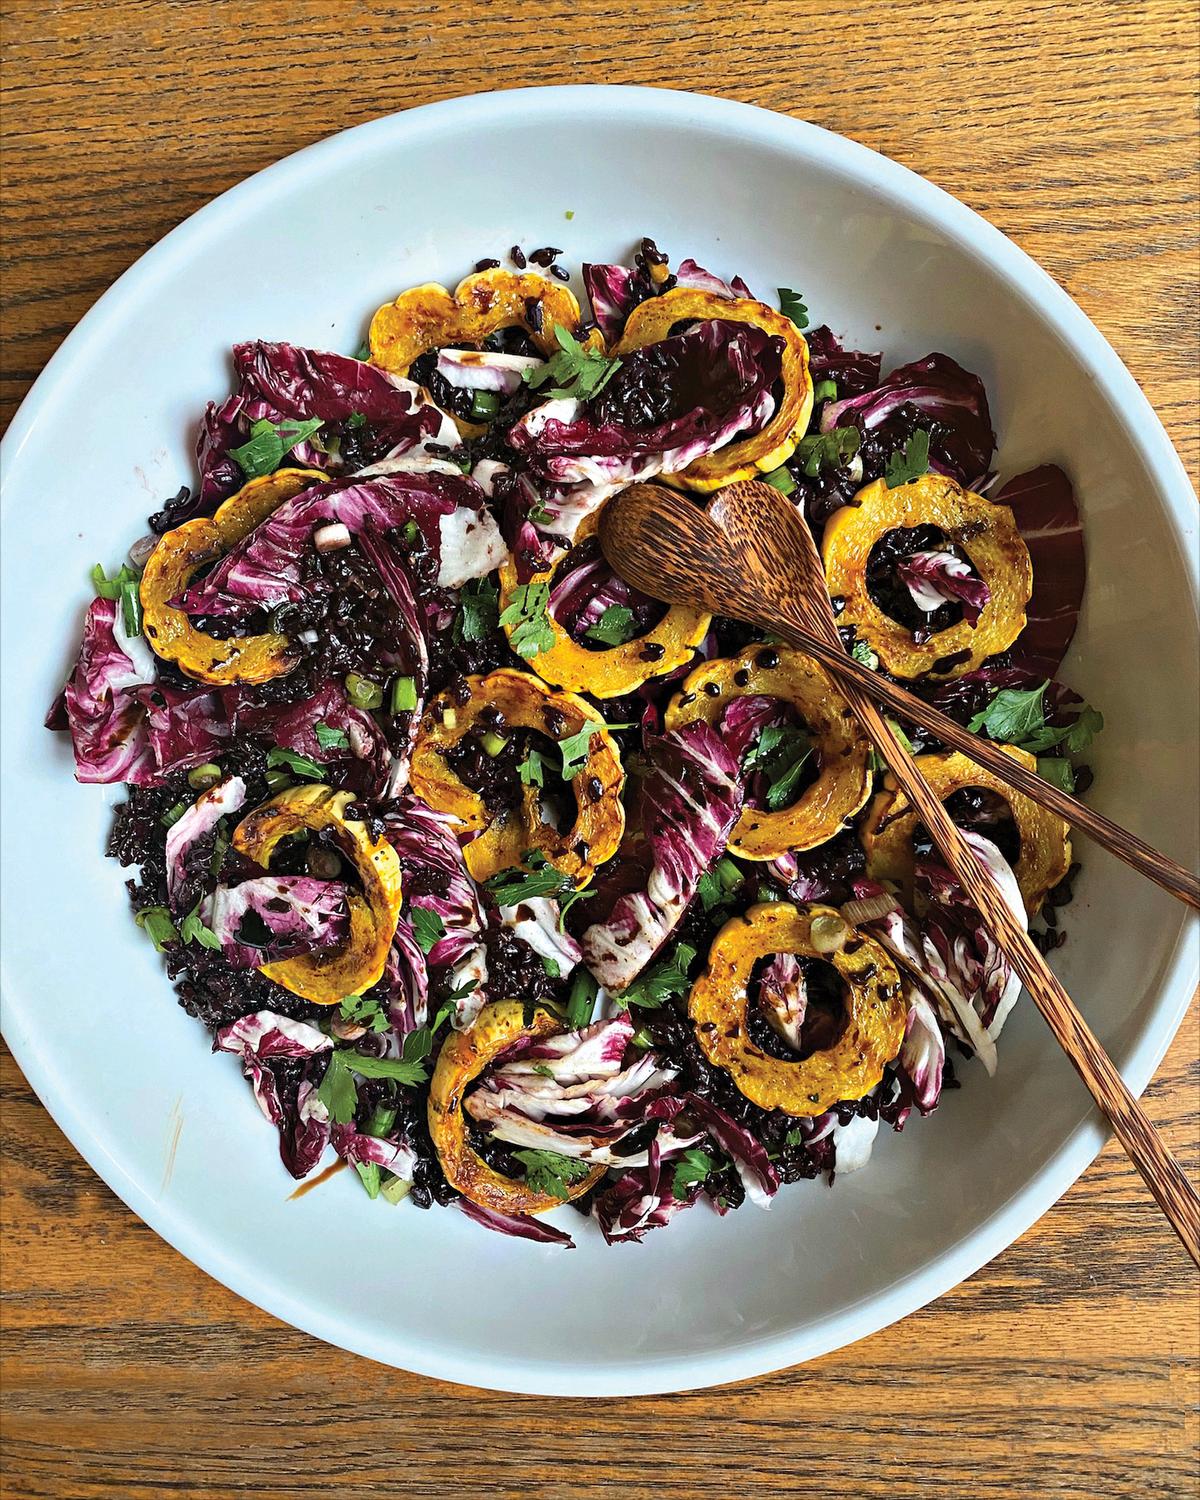 This vibrant salad is layered with toothsome nutty black rice, juicy-crisp radicchio leaves, and spice-roasted delicata squash rings. (Lynda Balslev for Tastefood)